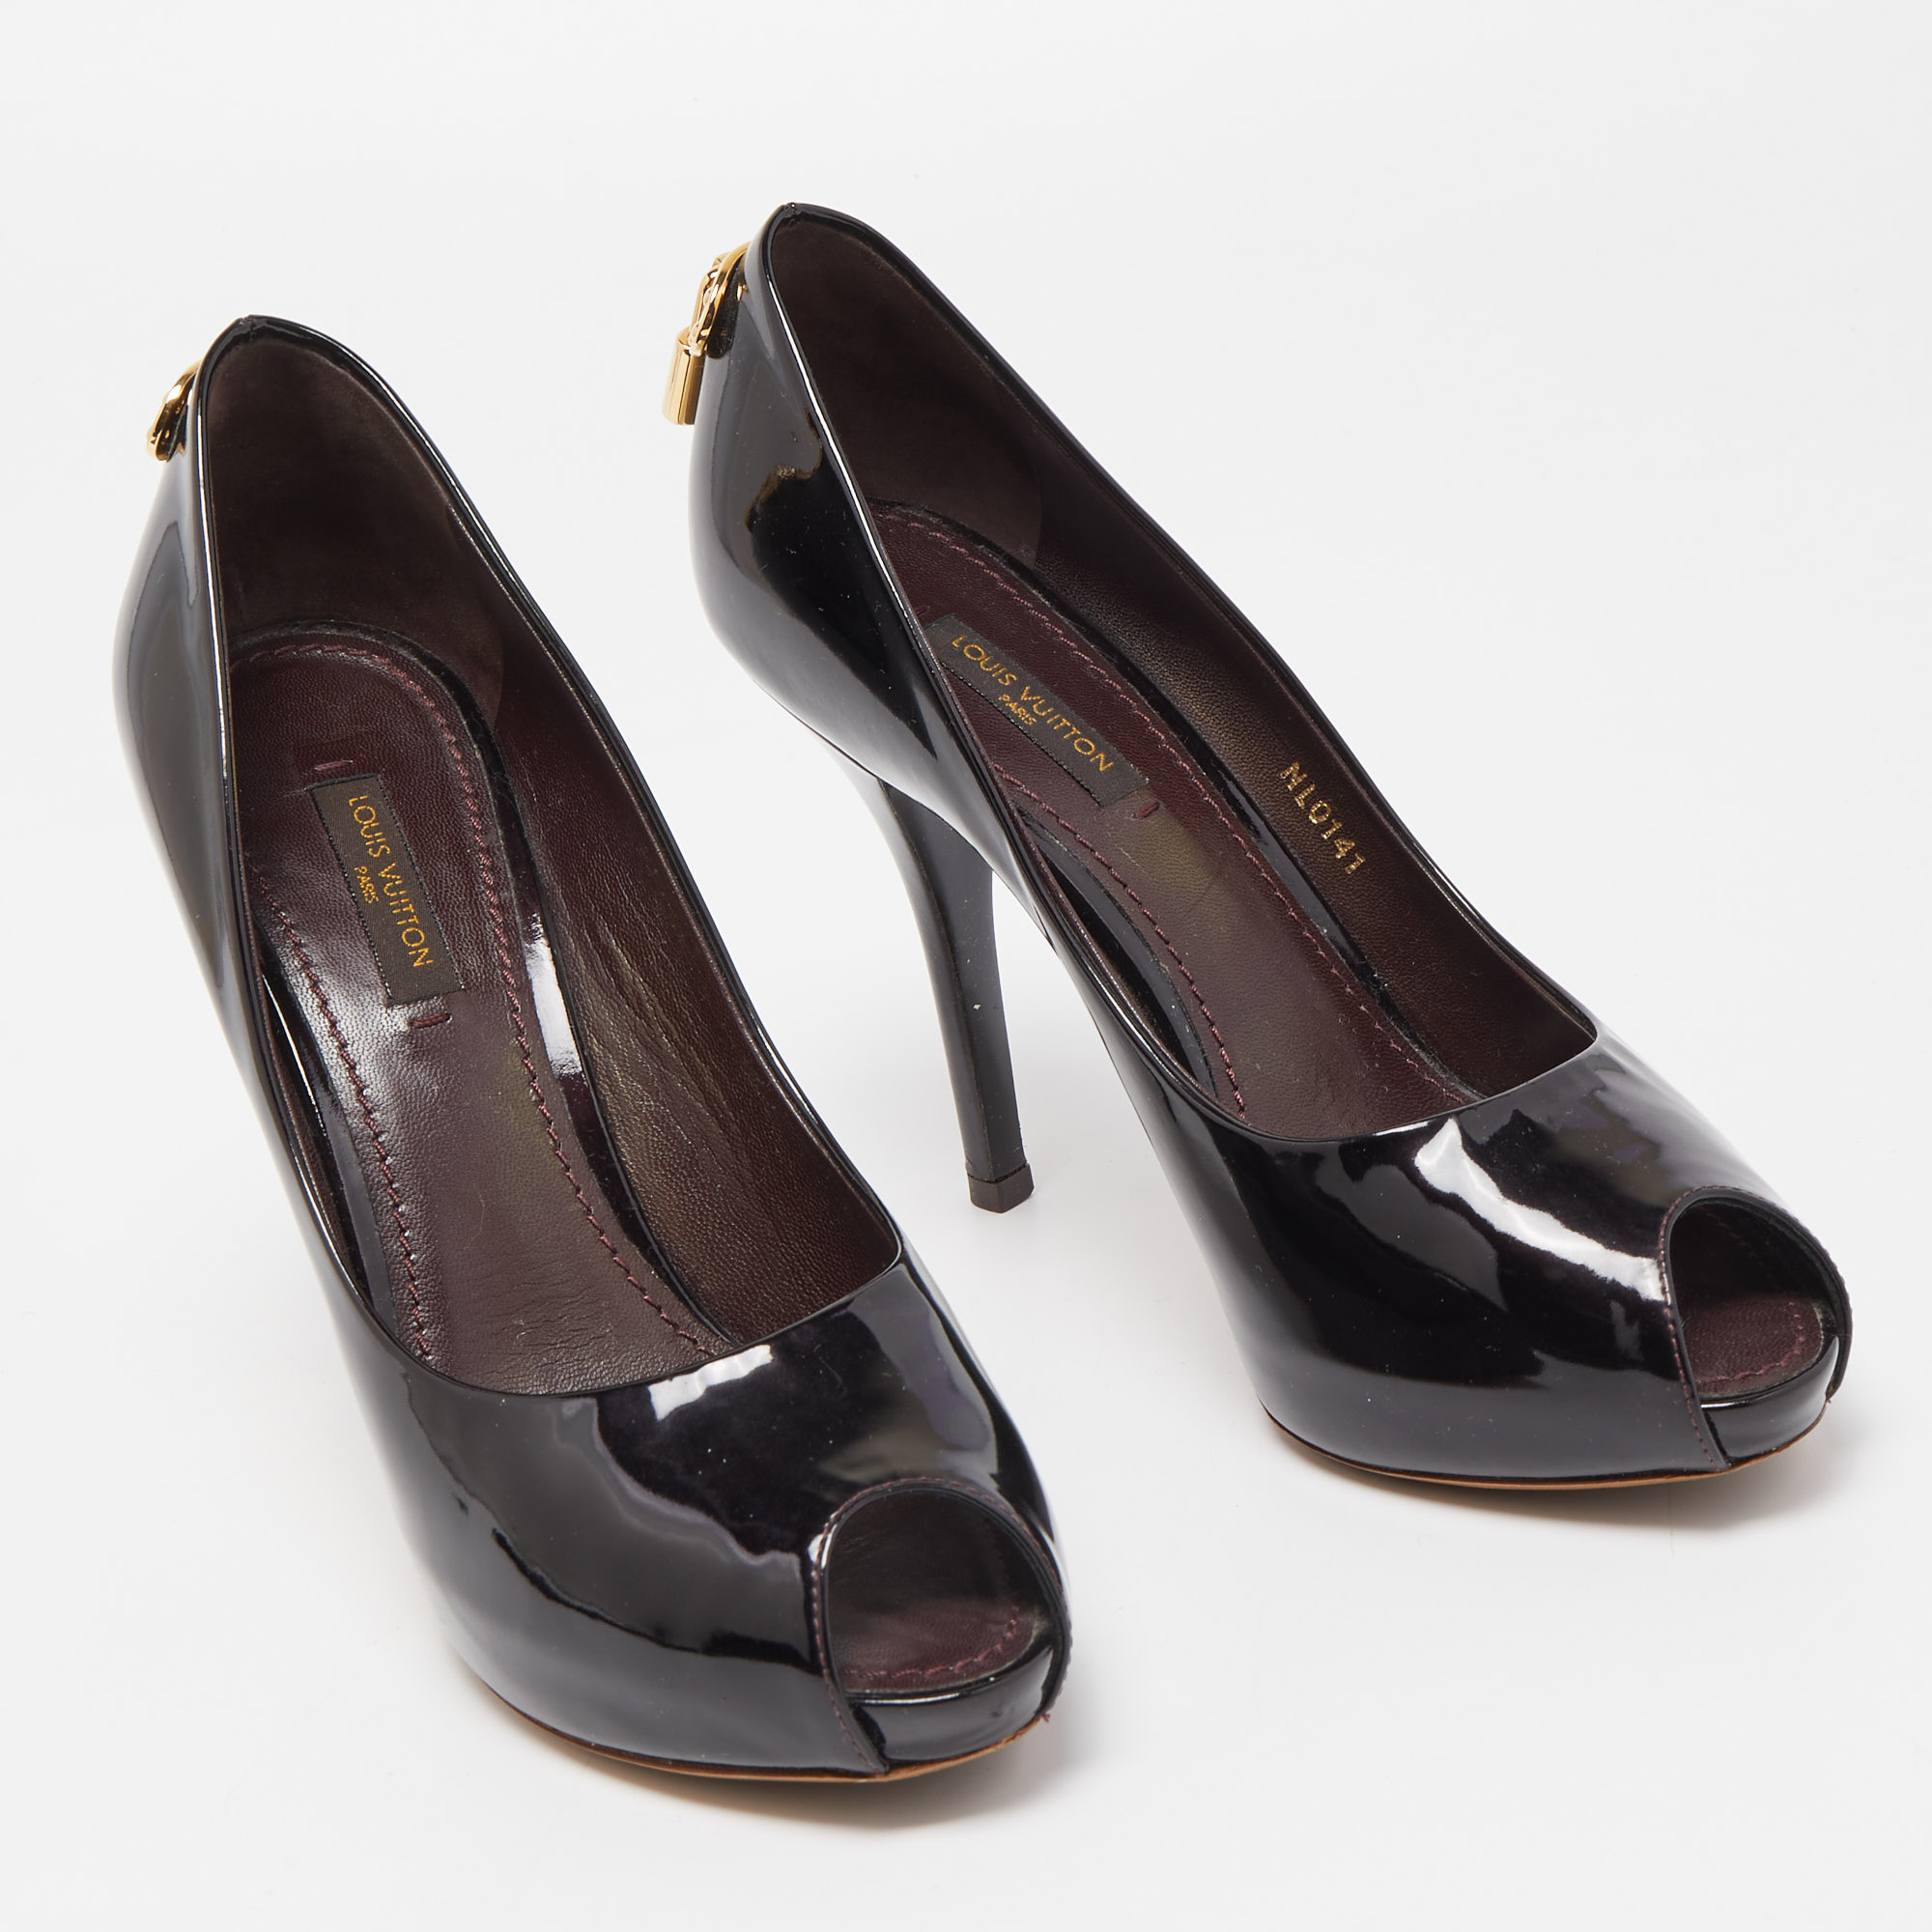 Louis Vuitton Dark Burgundy Patent Leather Oh Really! Peep Toe Pumps Size 36